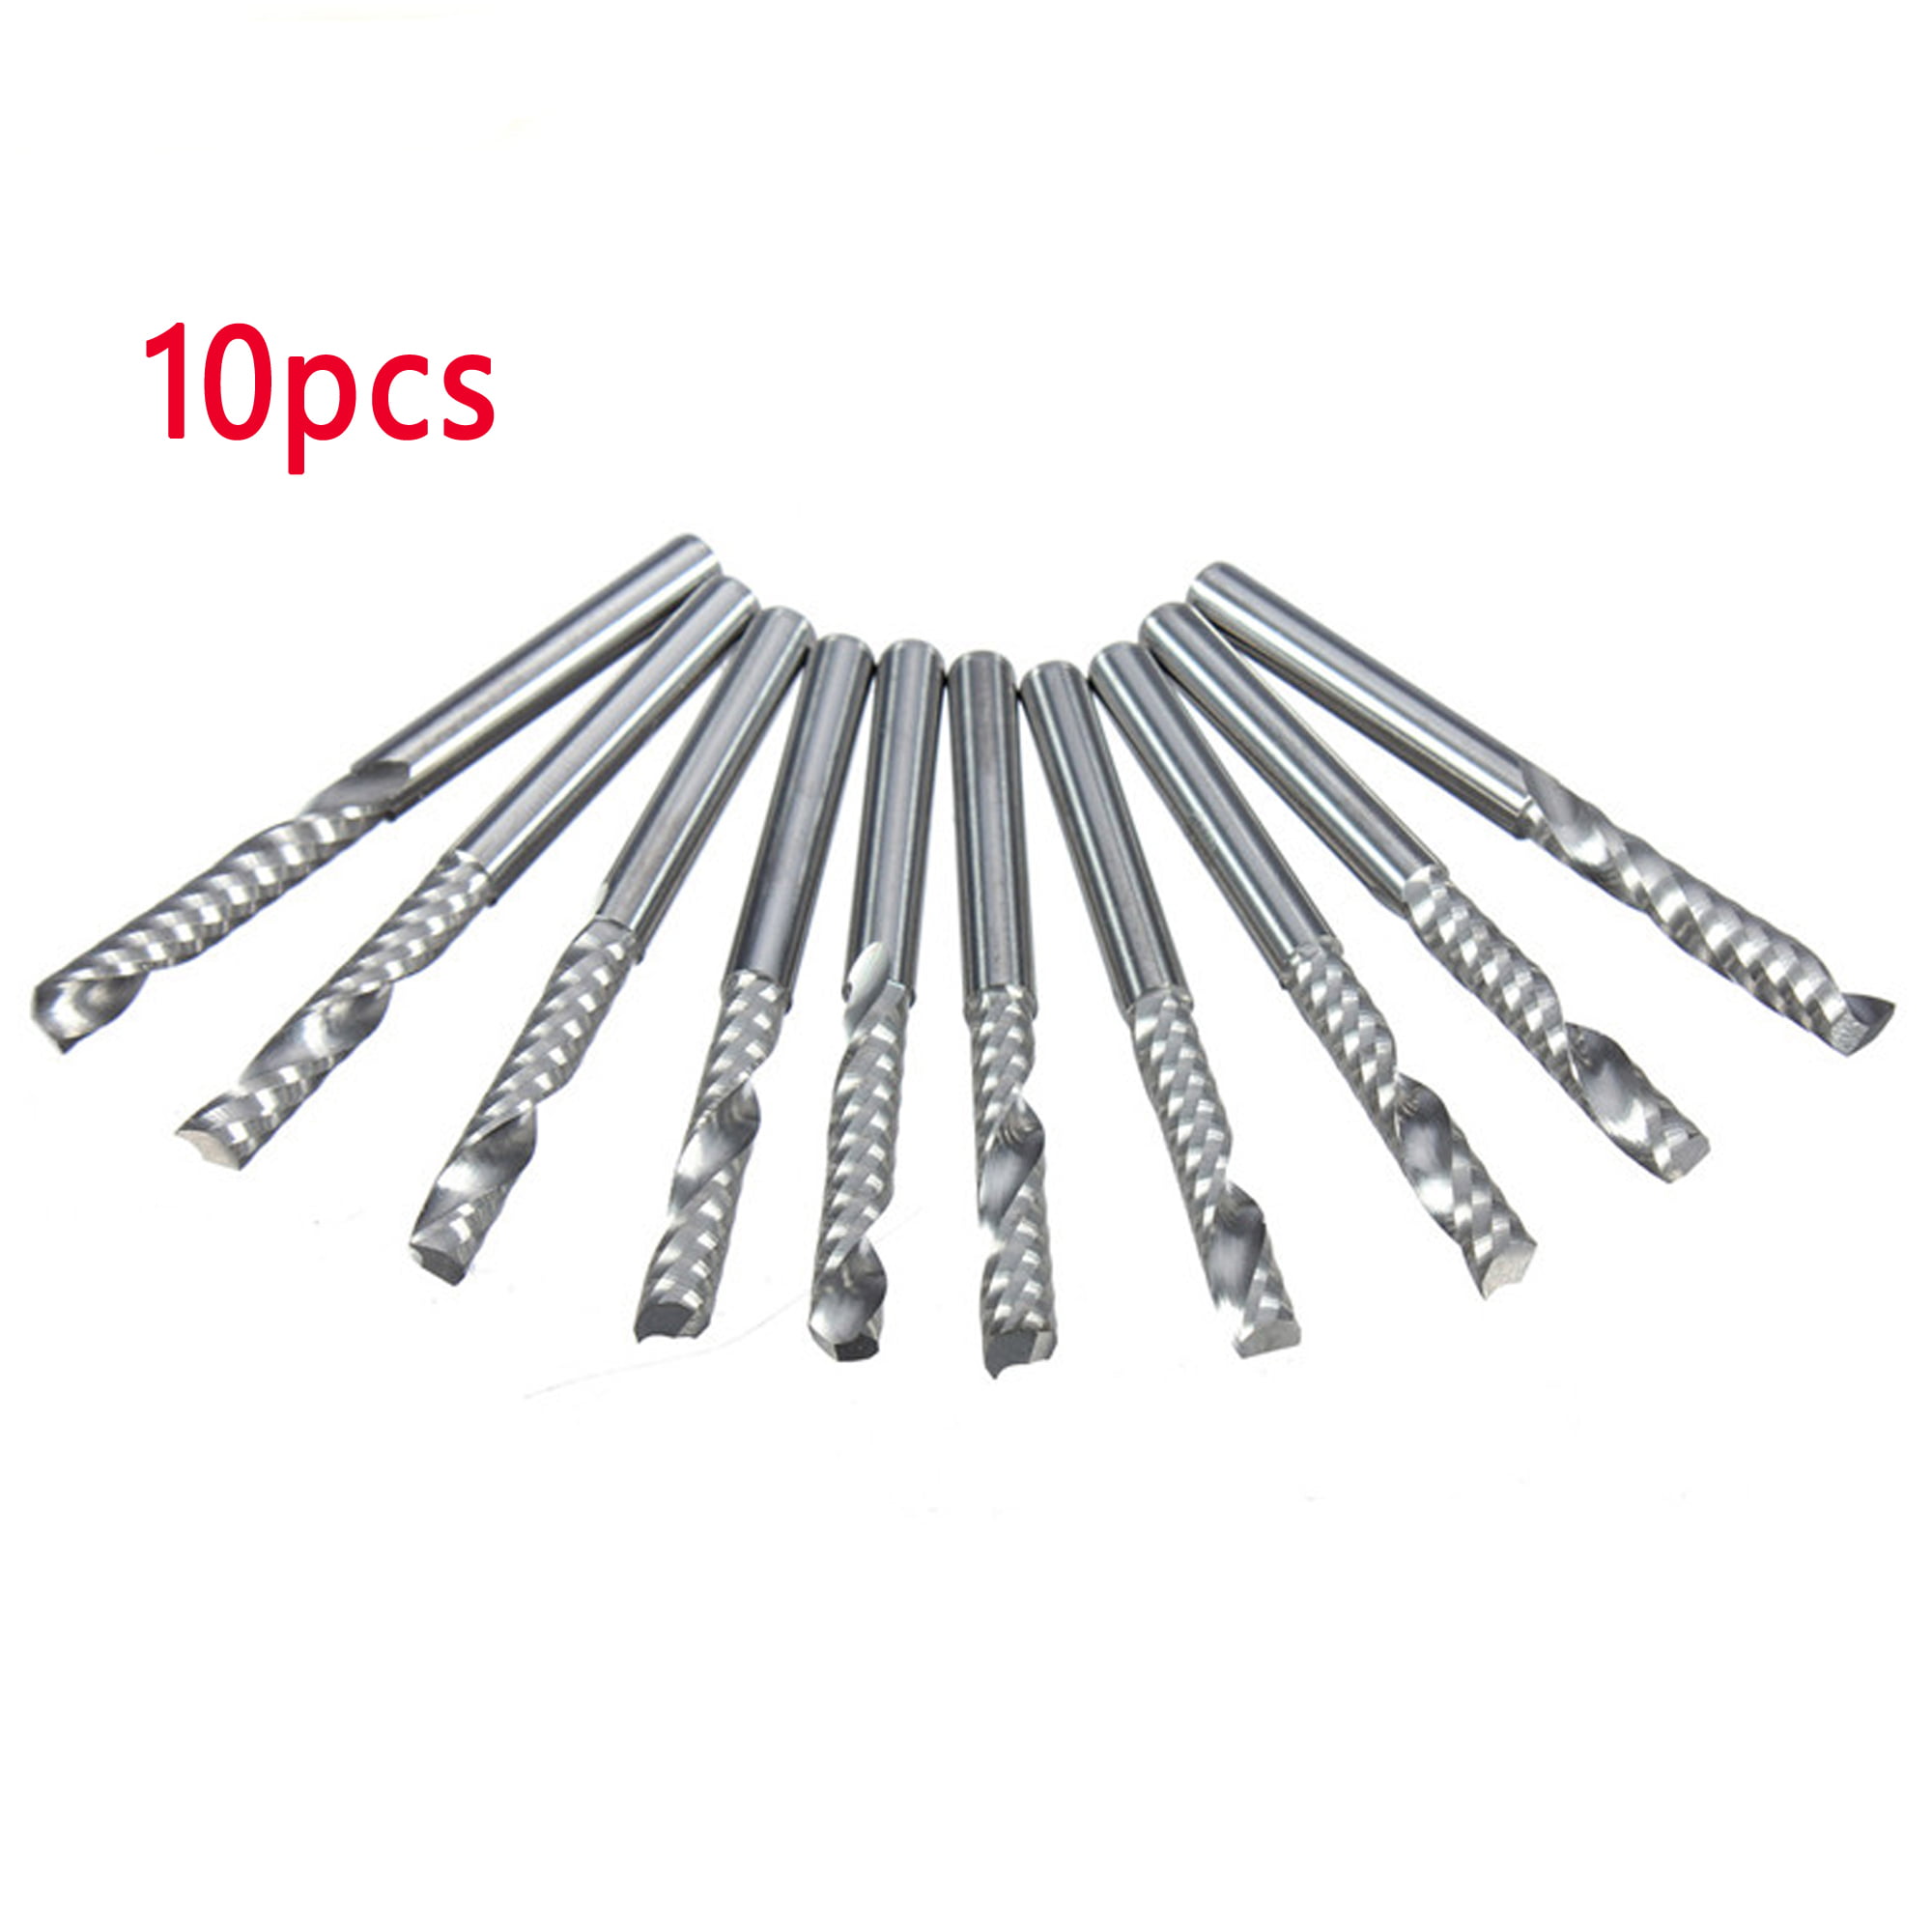 10x 1/8" Carbide Double Flute Spiral ball Nose End Mill CNC Router Bits 17mm New 